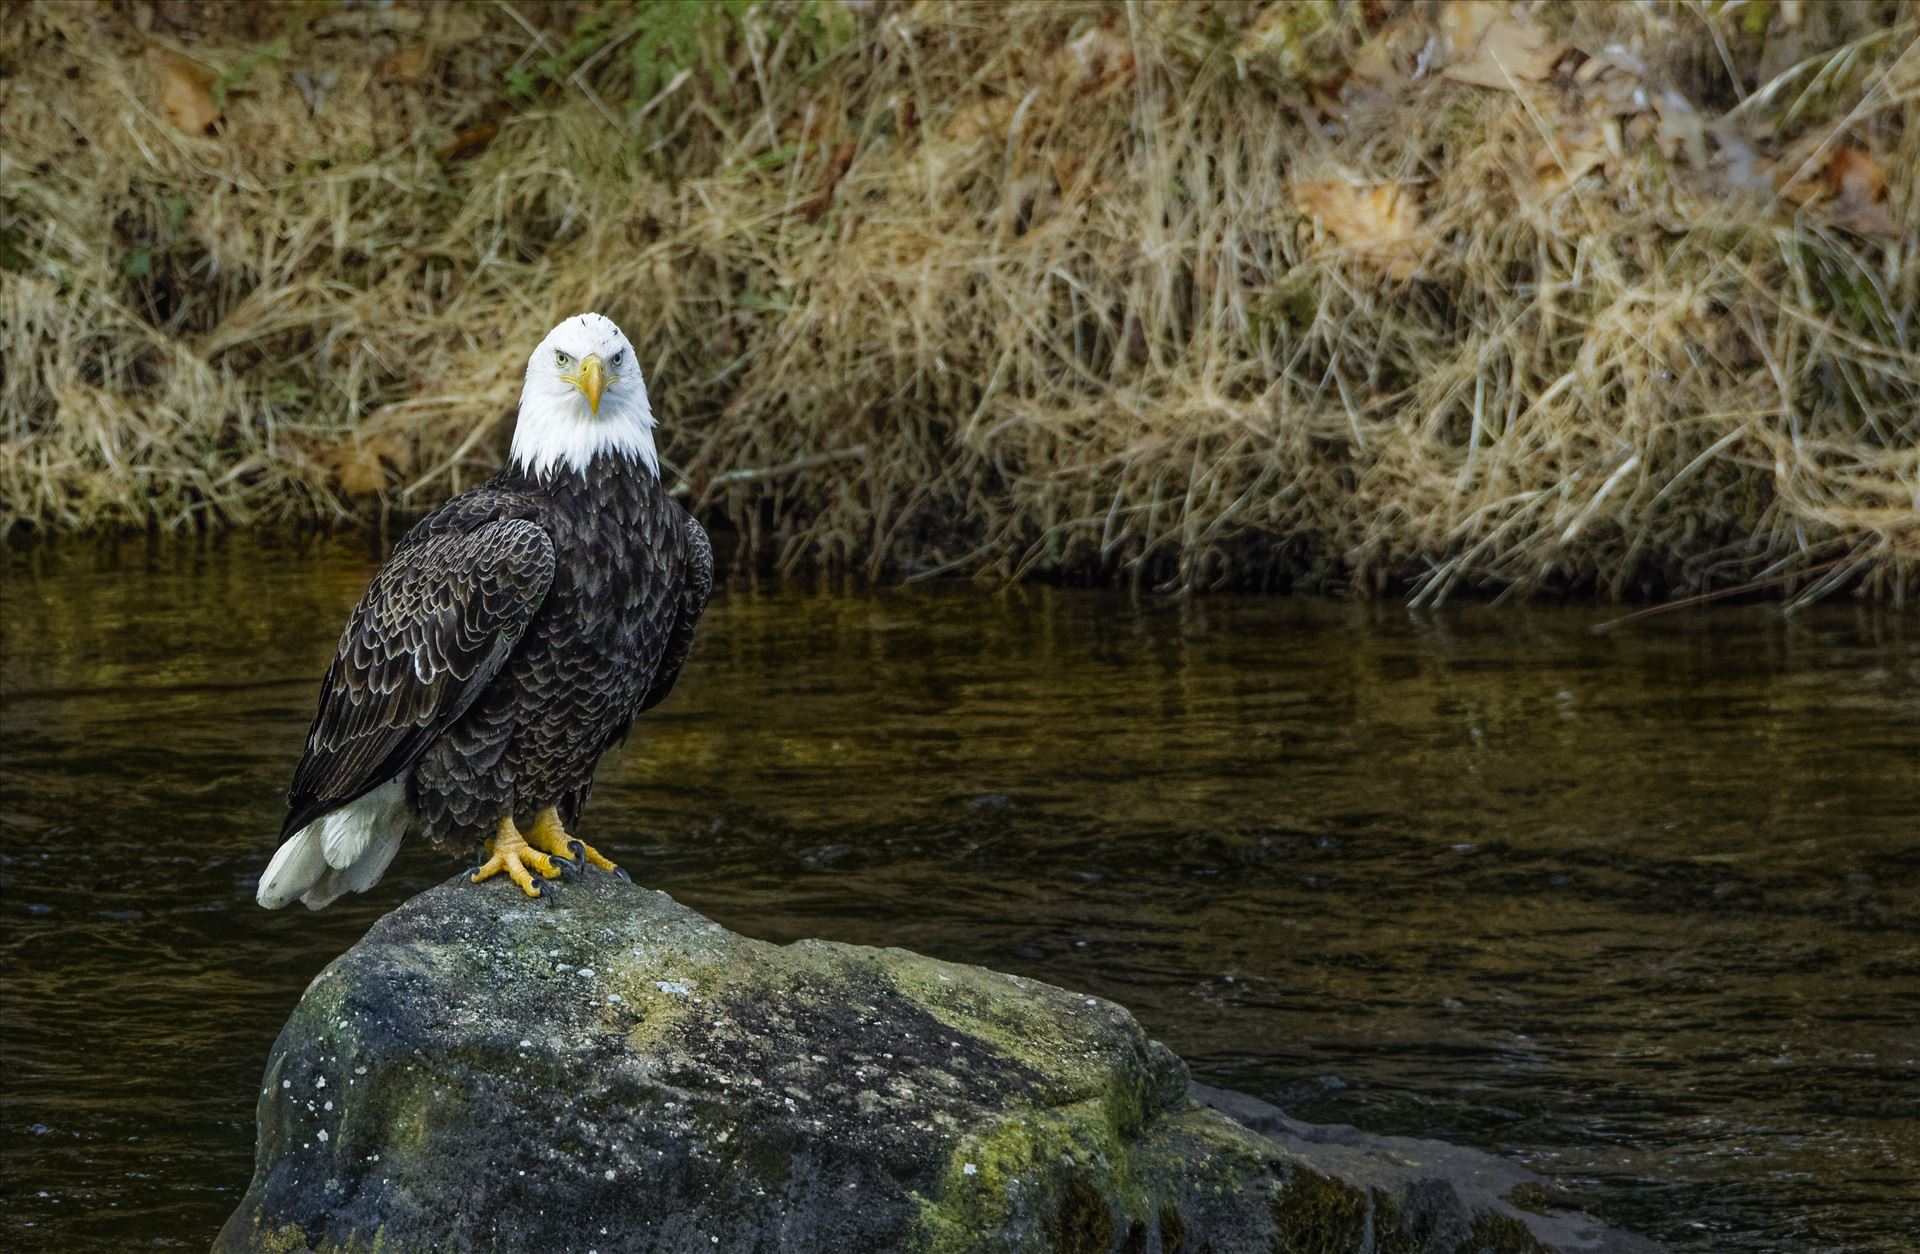 Bald Eagle on the Rocks Bald Eagle on the Rocks by Buckmaster